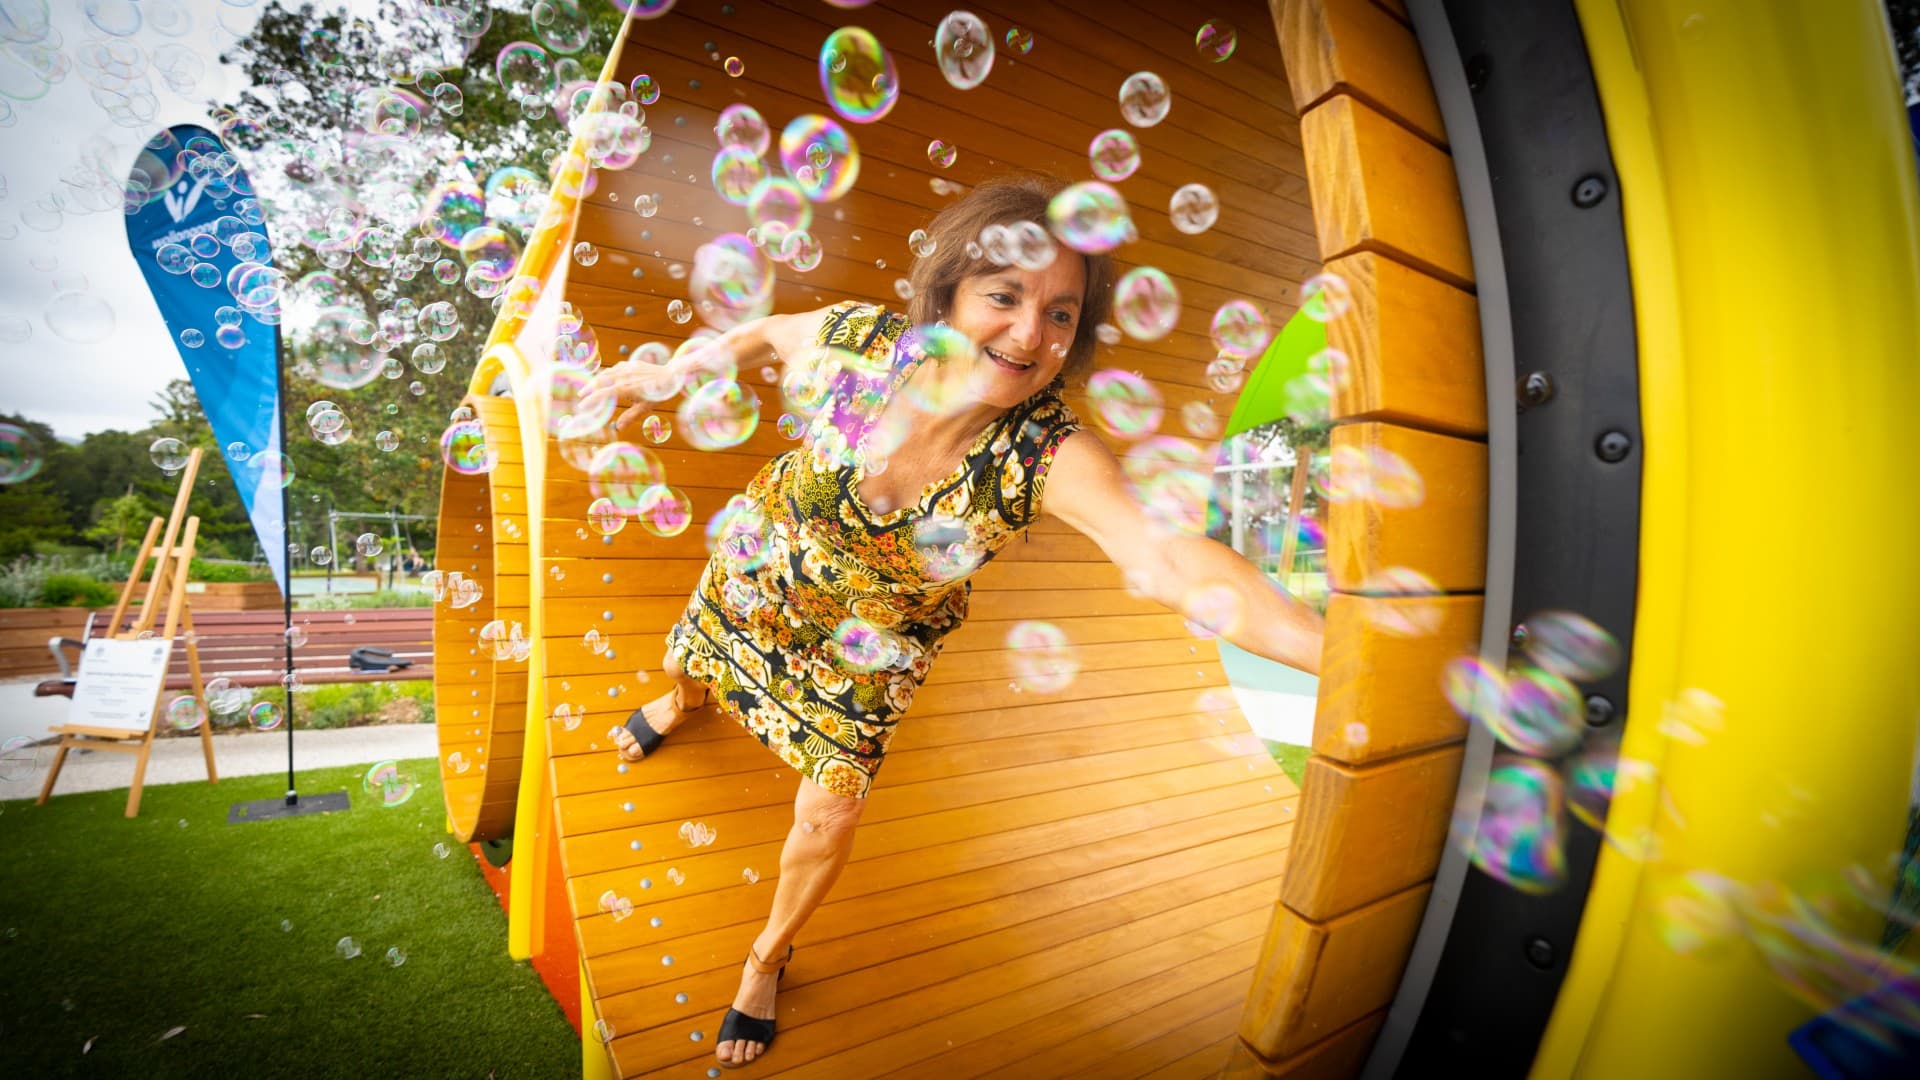 Shoshana Dreyfus uses a mouse wheel with bubbles in the foreground at the launch of a new playground in Wollongong. Photo: Paul Jones